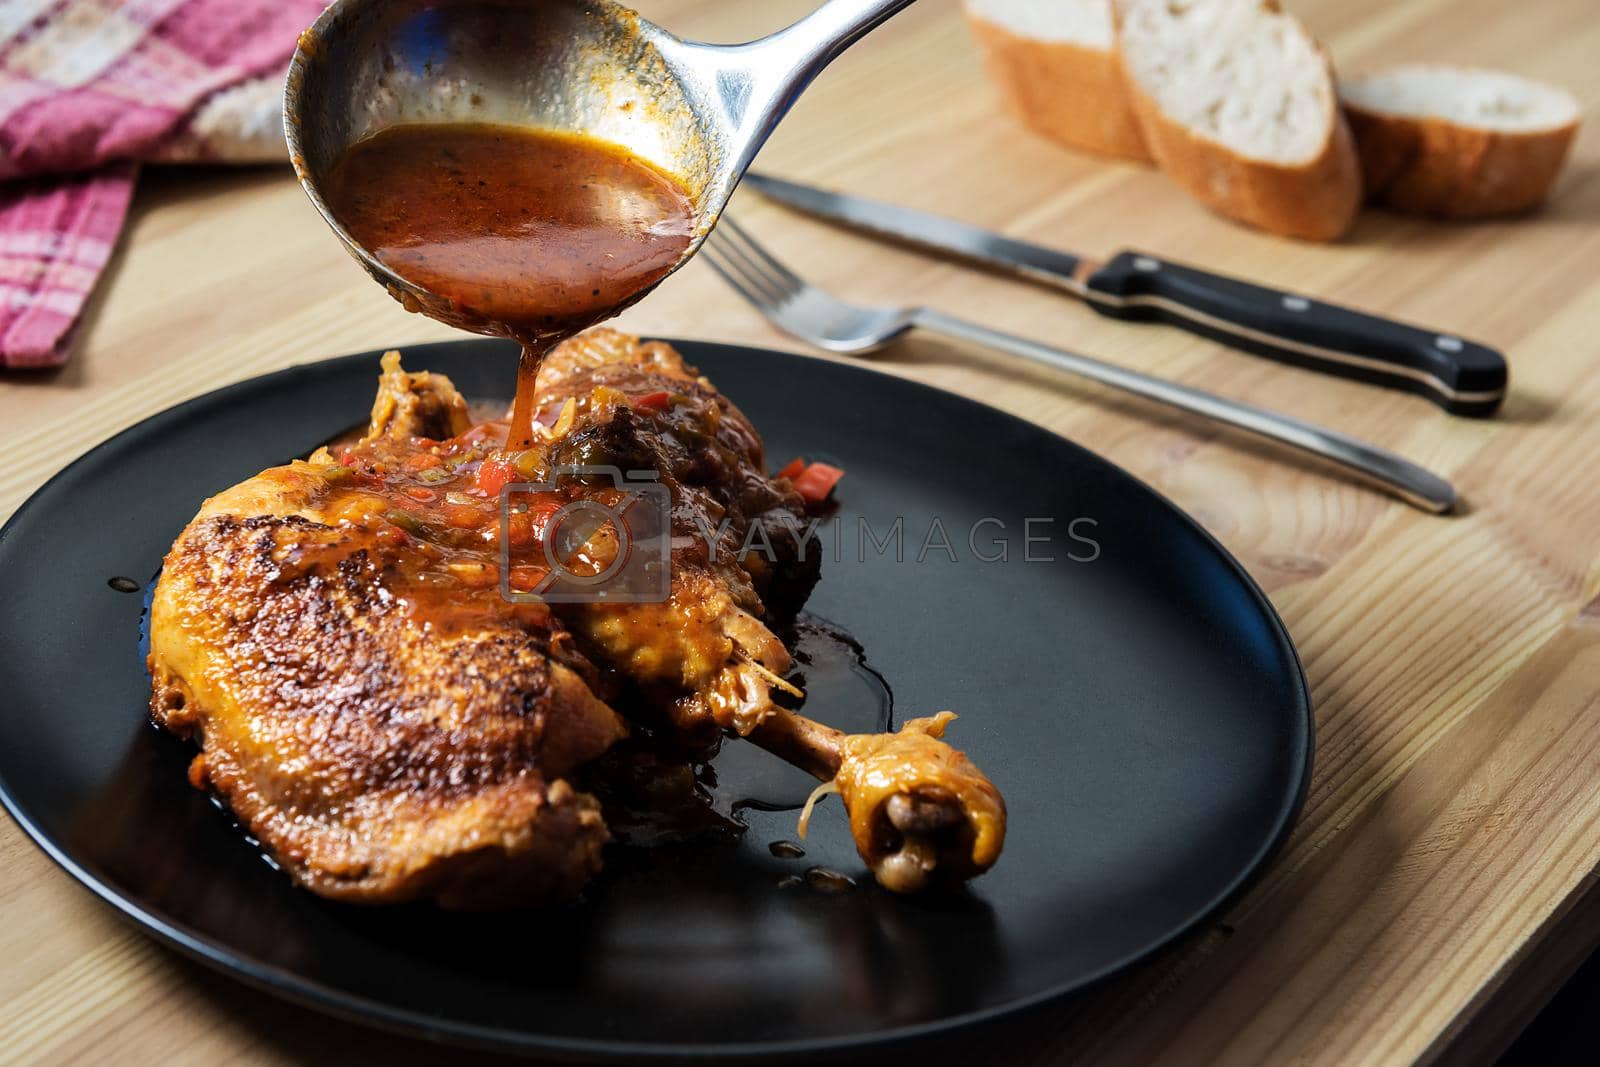 Royalty free image of ladle pouring garnish on the chicken by raulmelldo